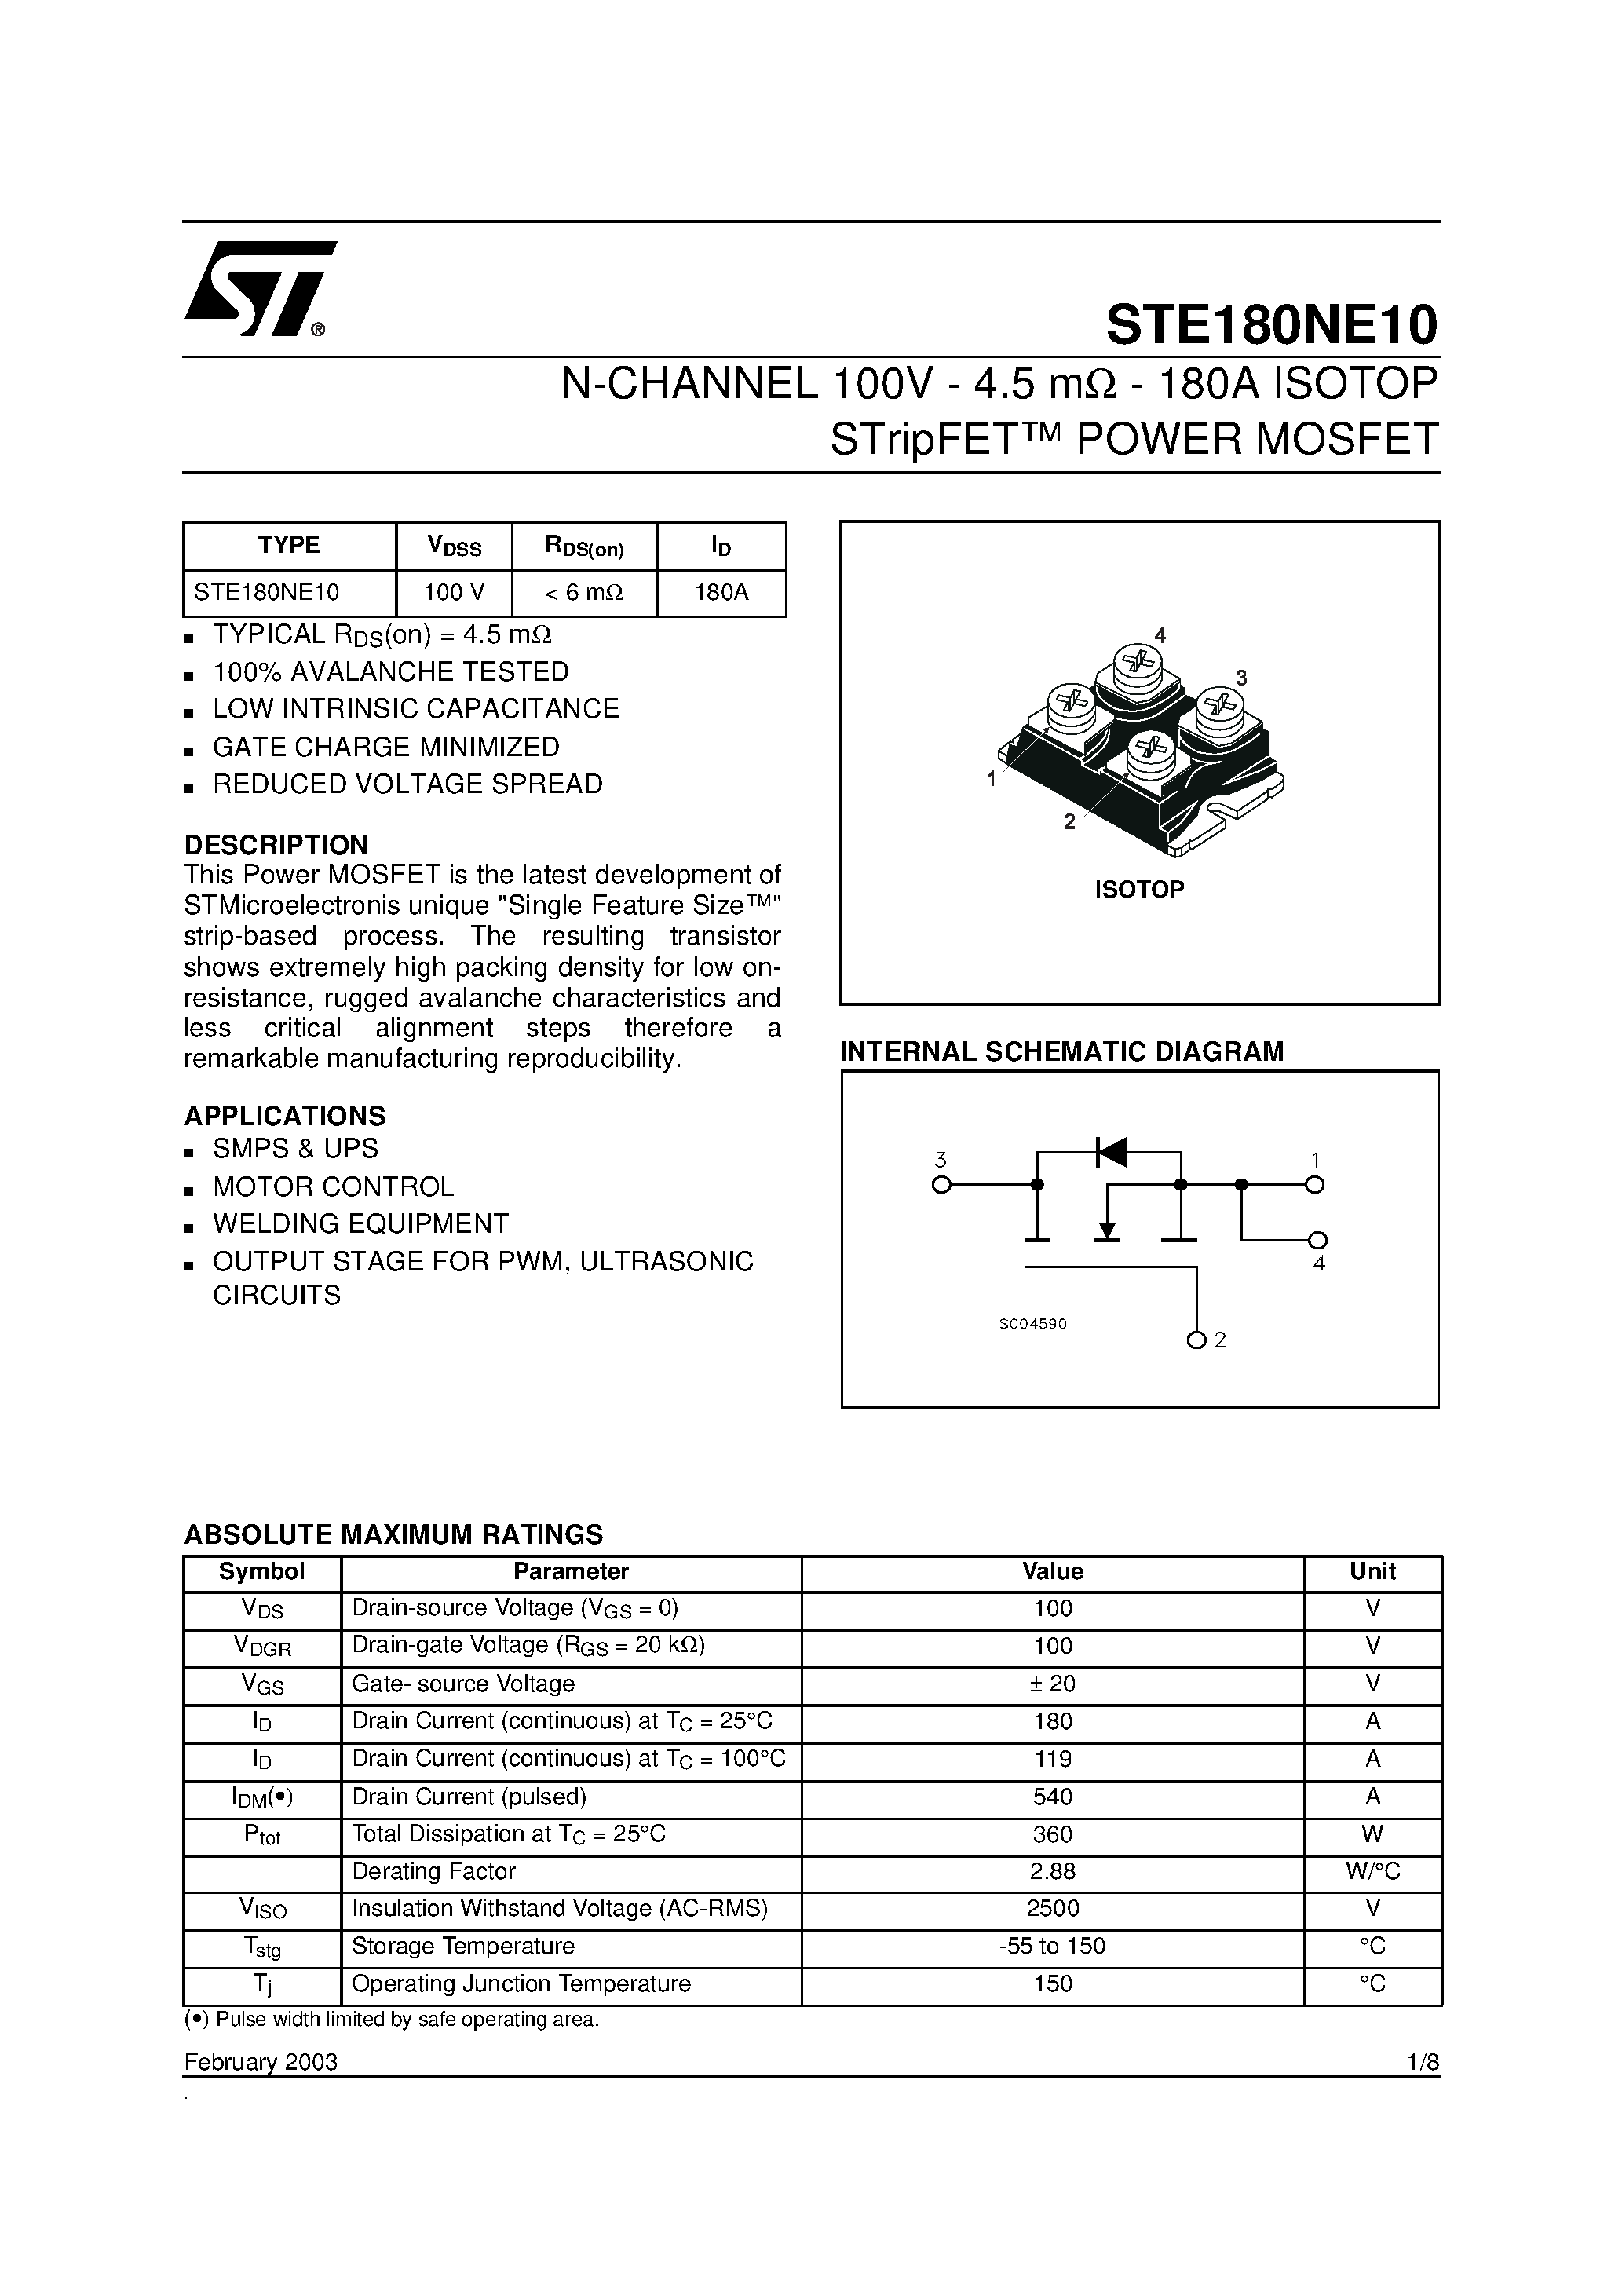 Даташит STE180NE10 - N-CHANNEL 100V - 4.5 mohm - 180A ISOTOP STripFET POWER MOSFET страница 1